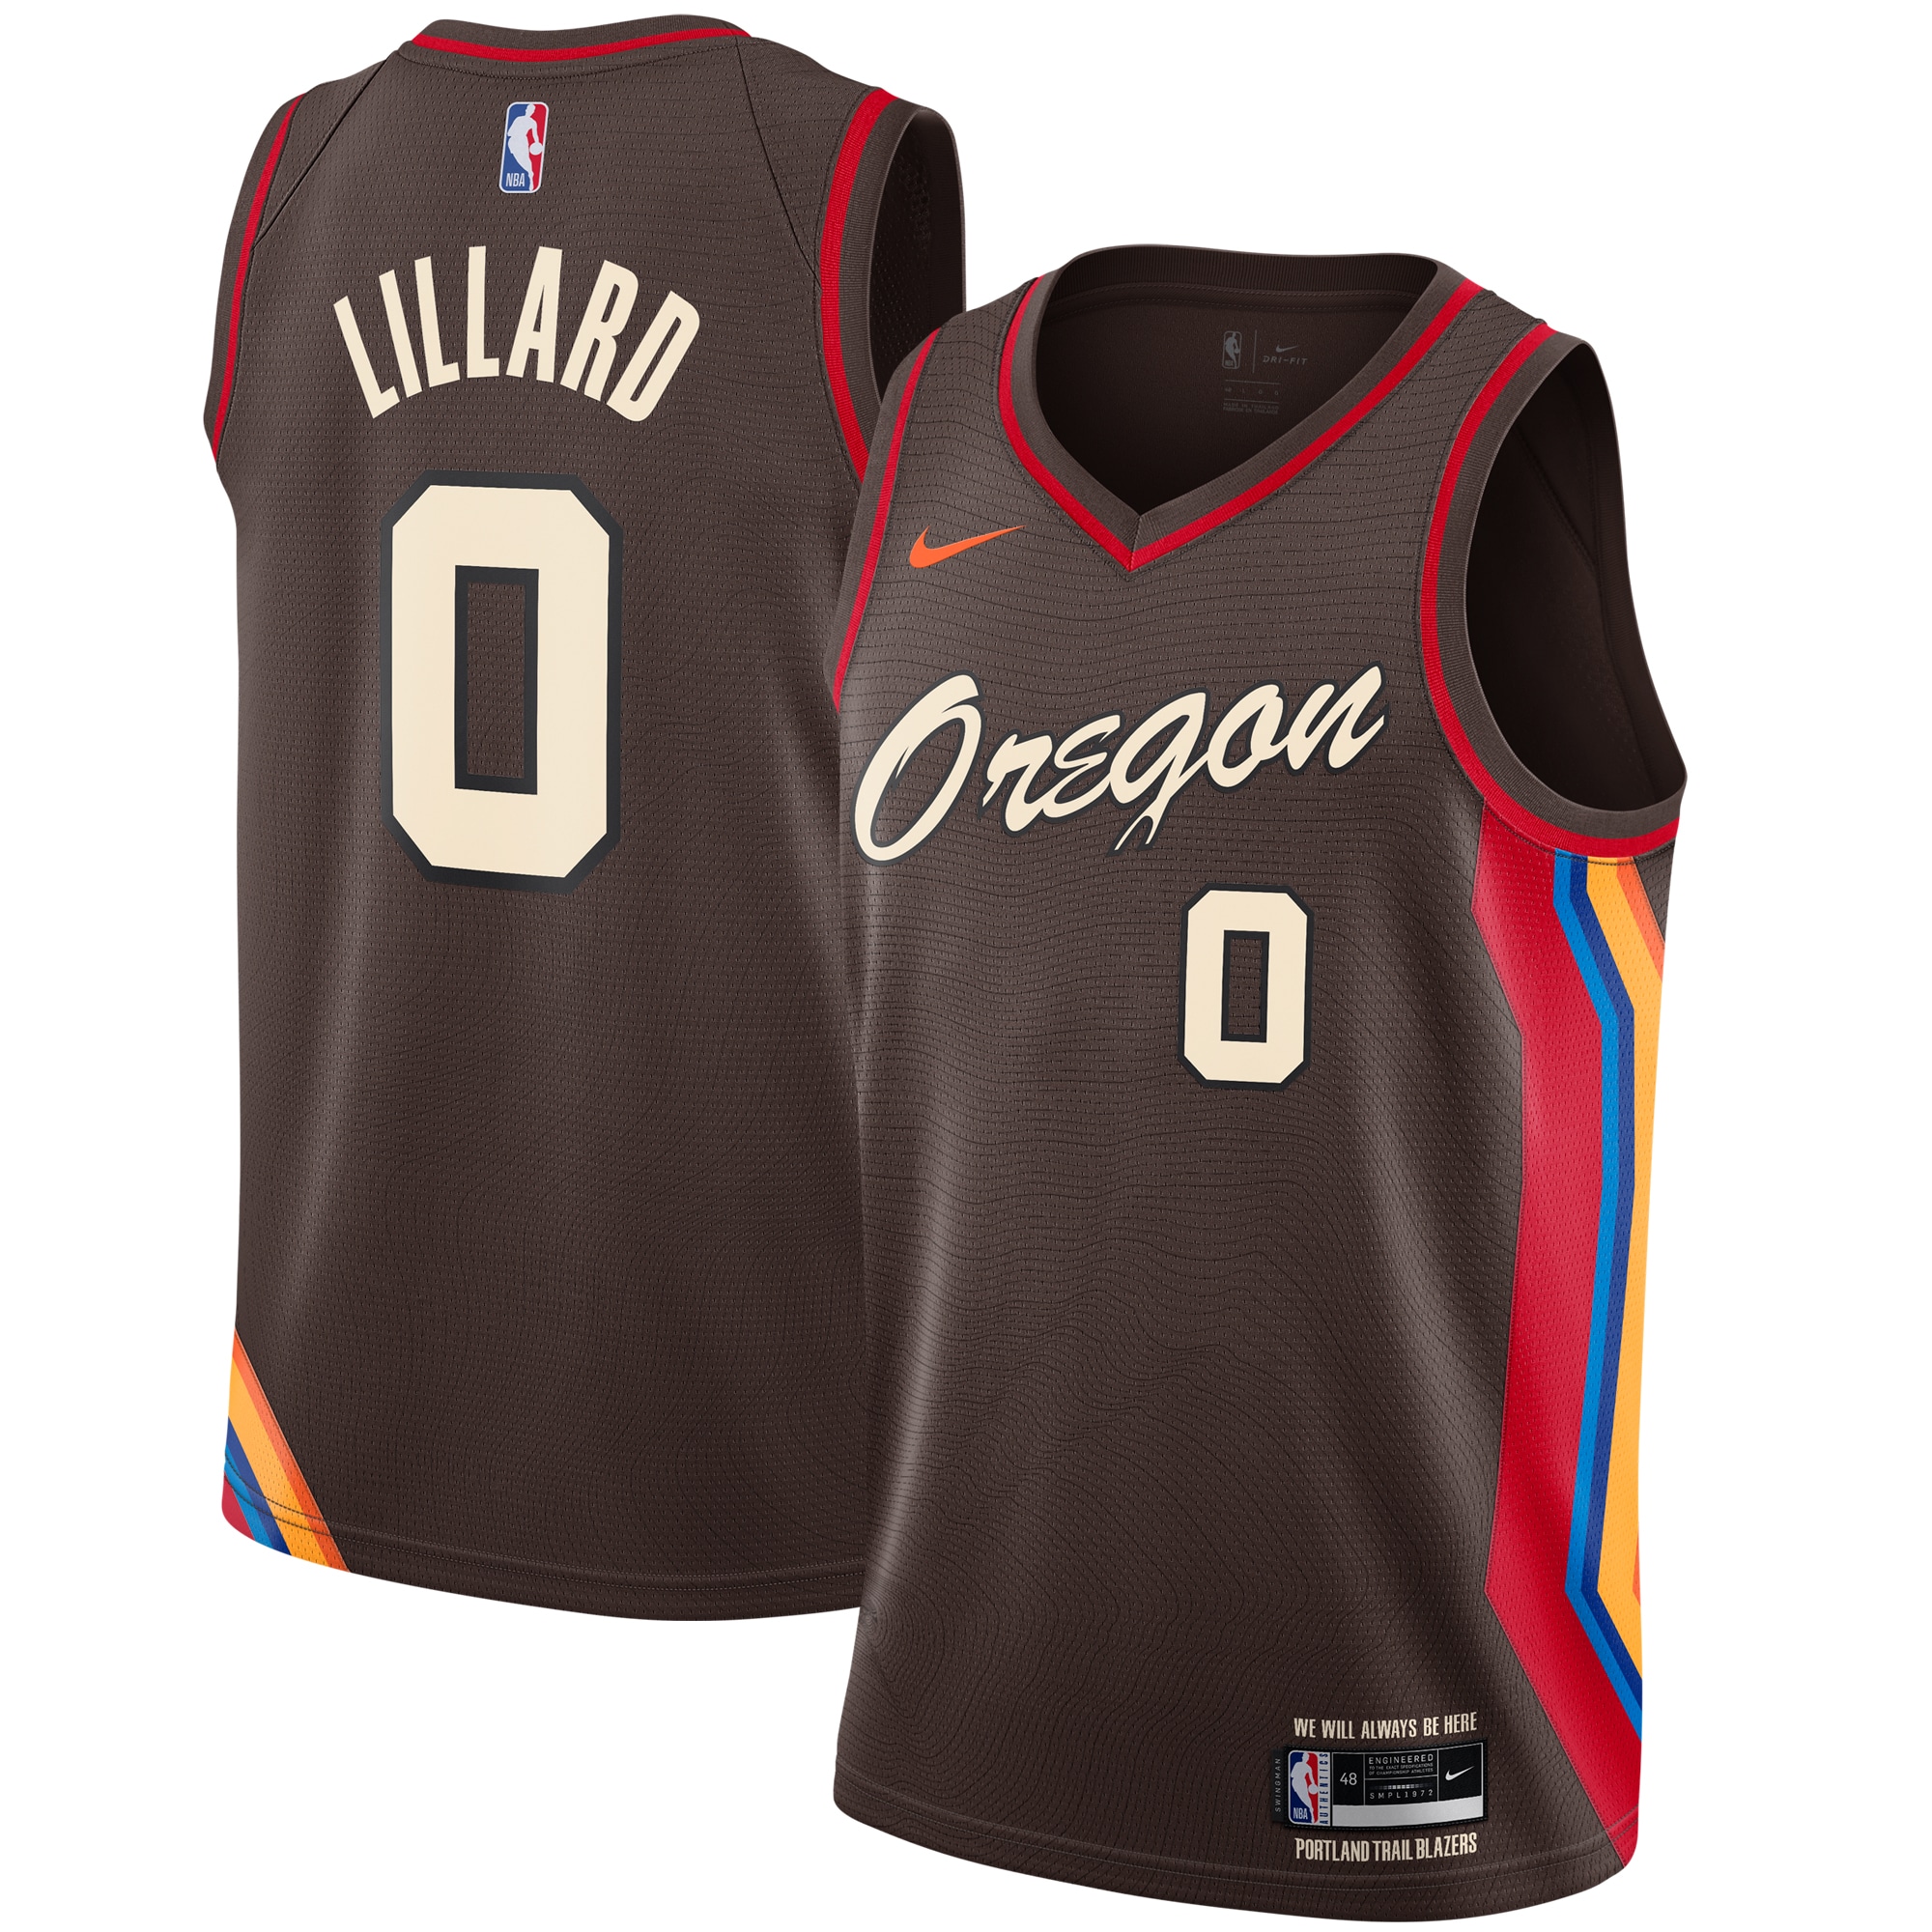 New Portland Trail Blazers City Edition jerseys officially announced